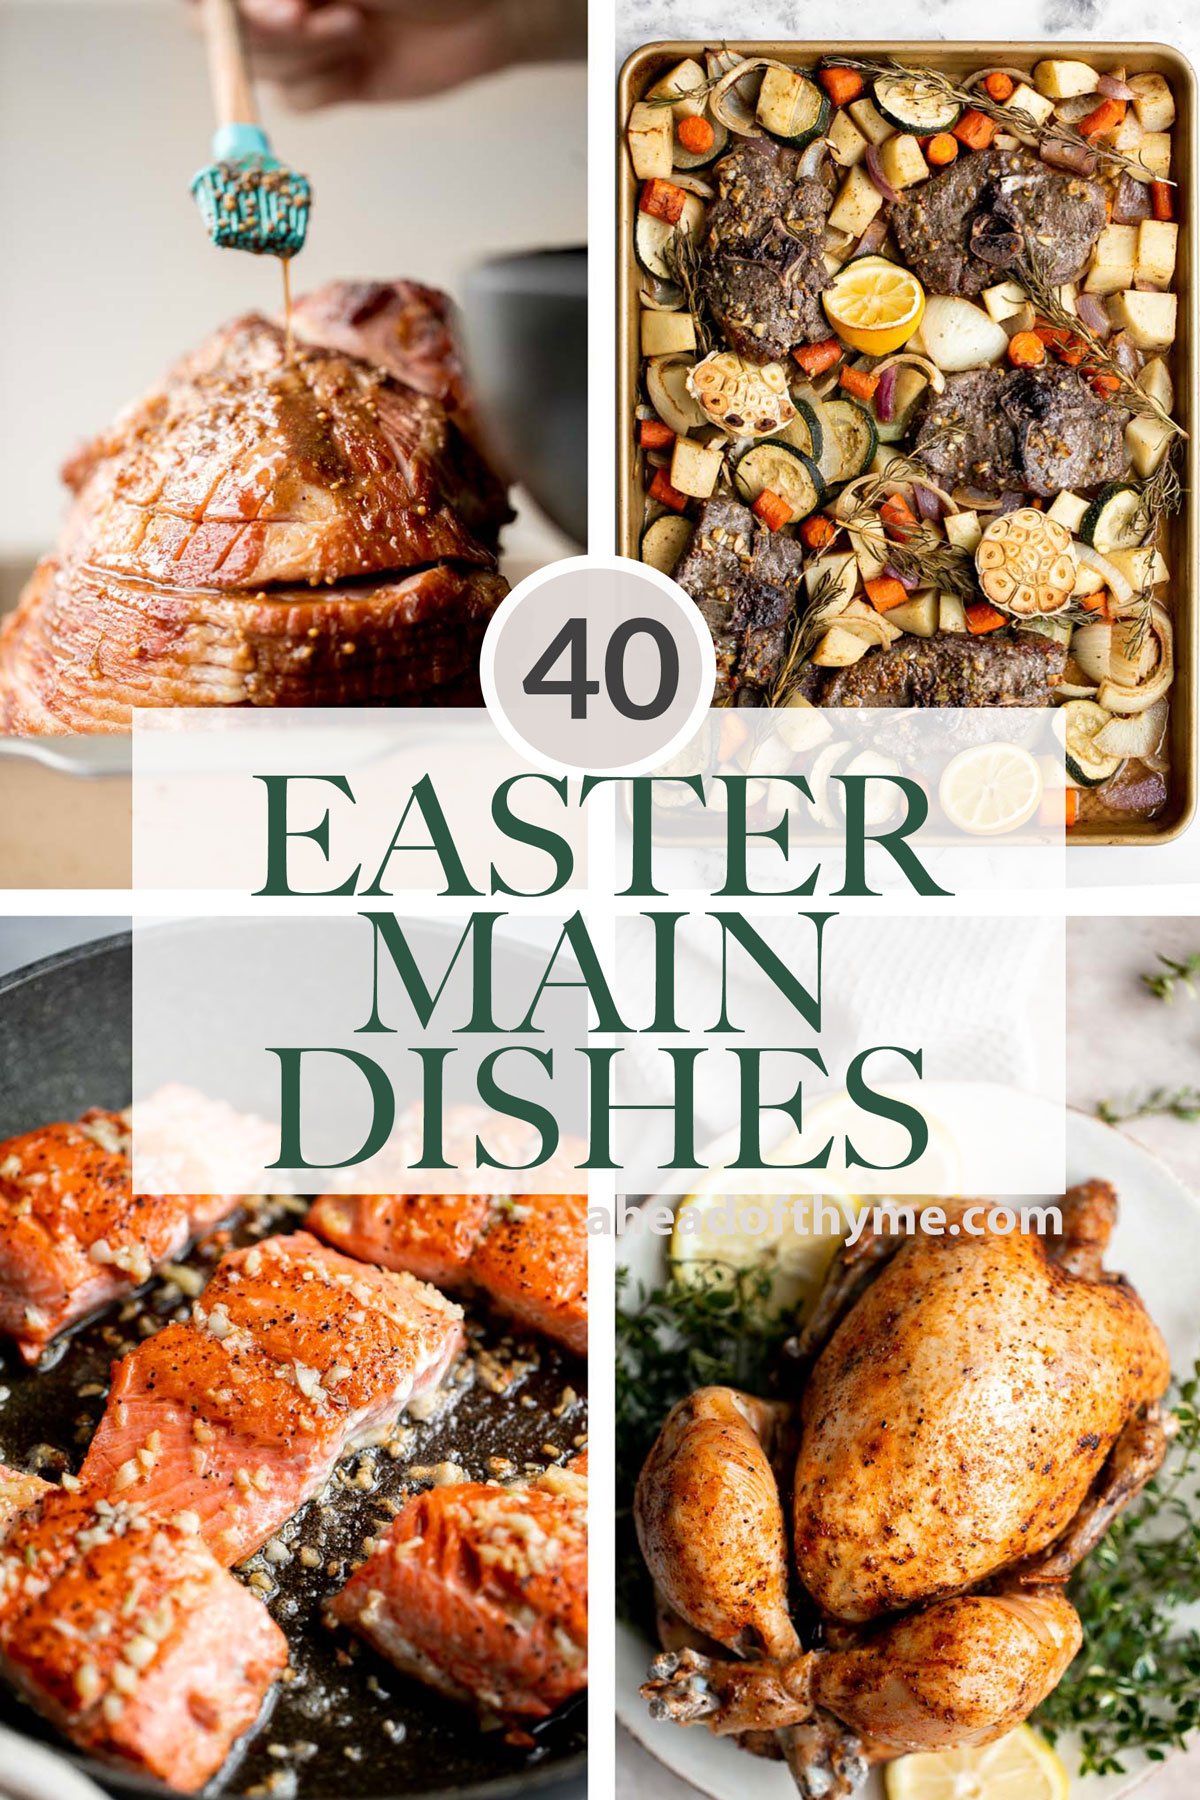 Easter entrees